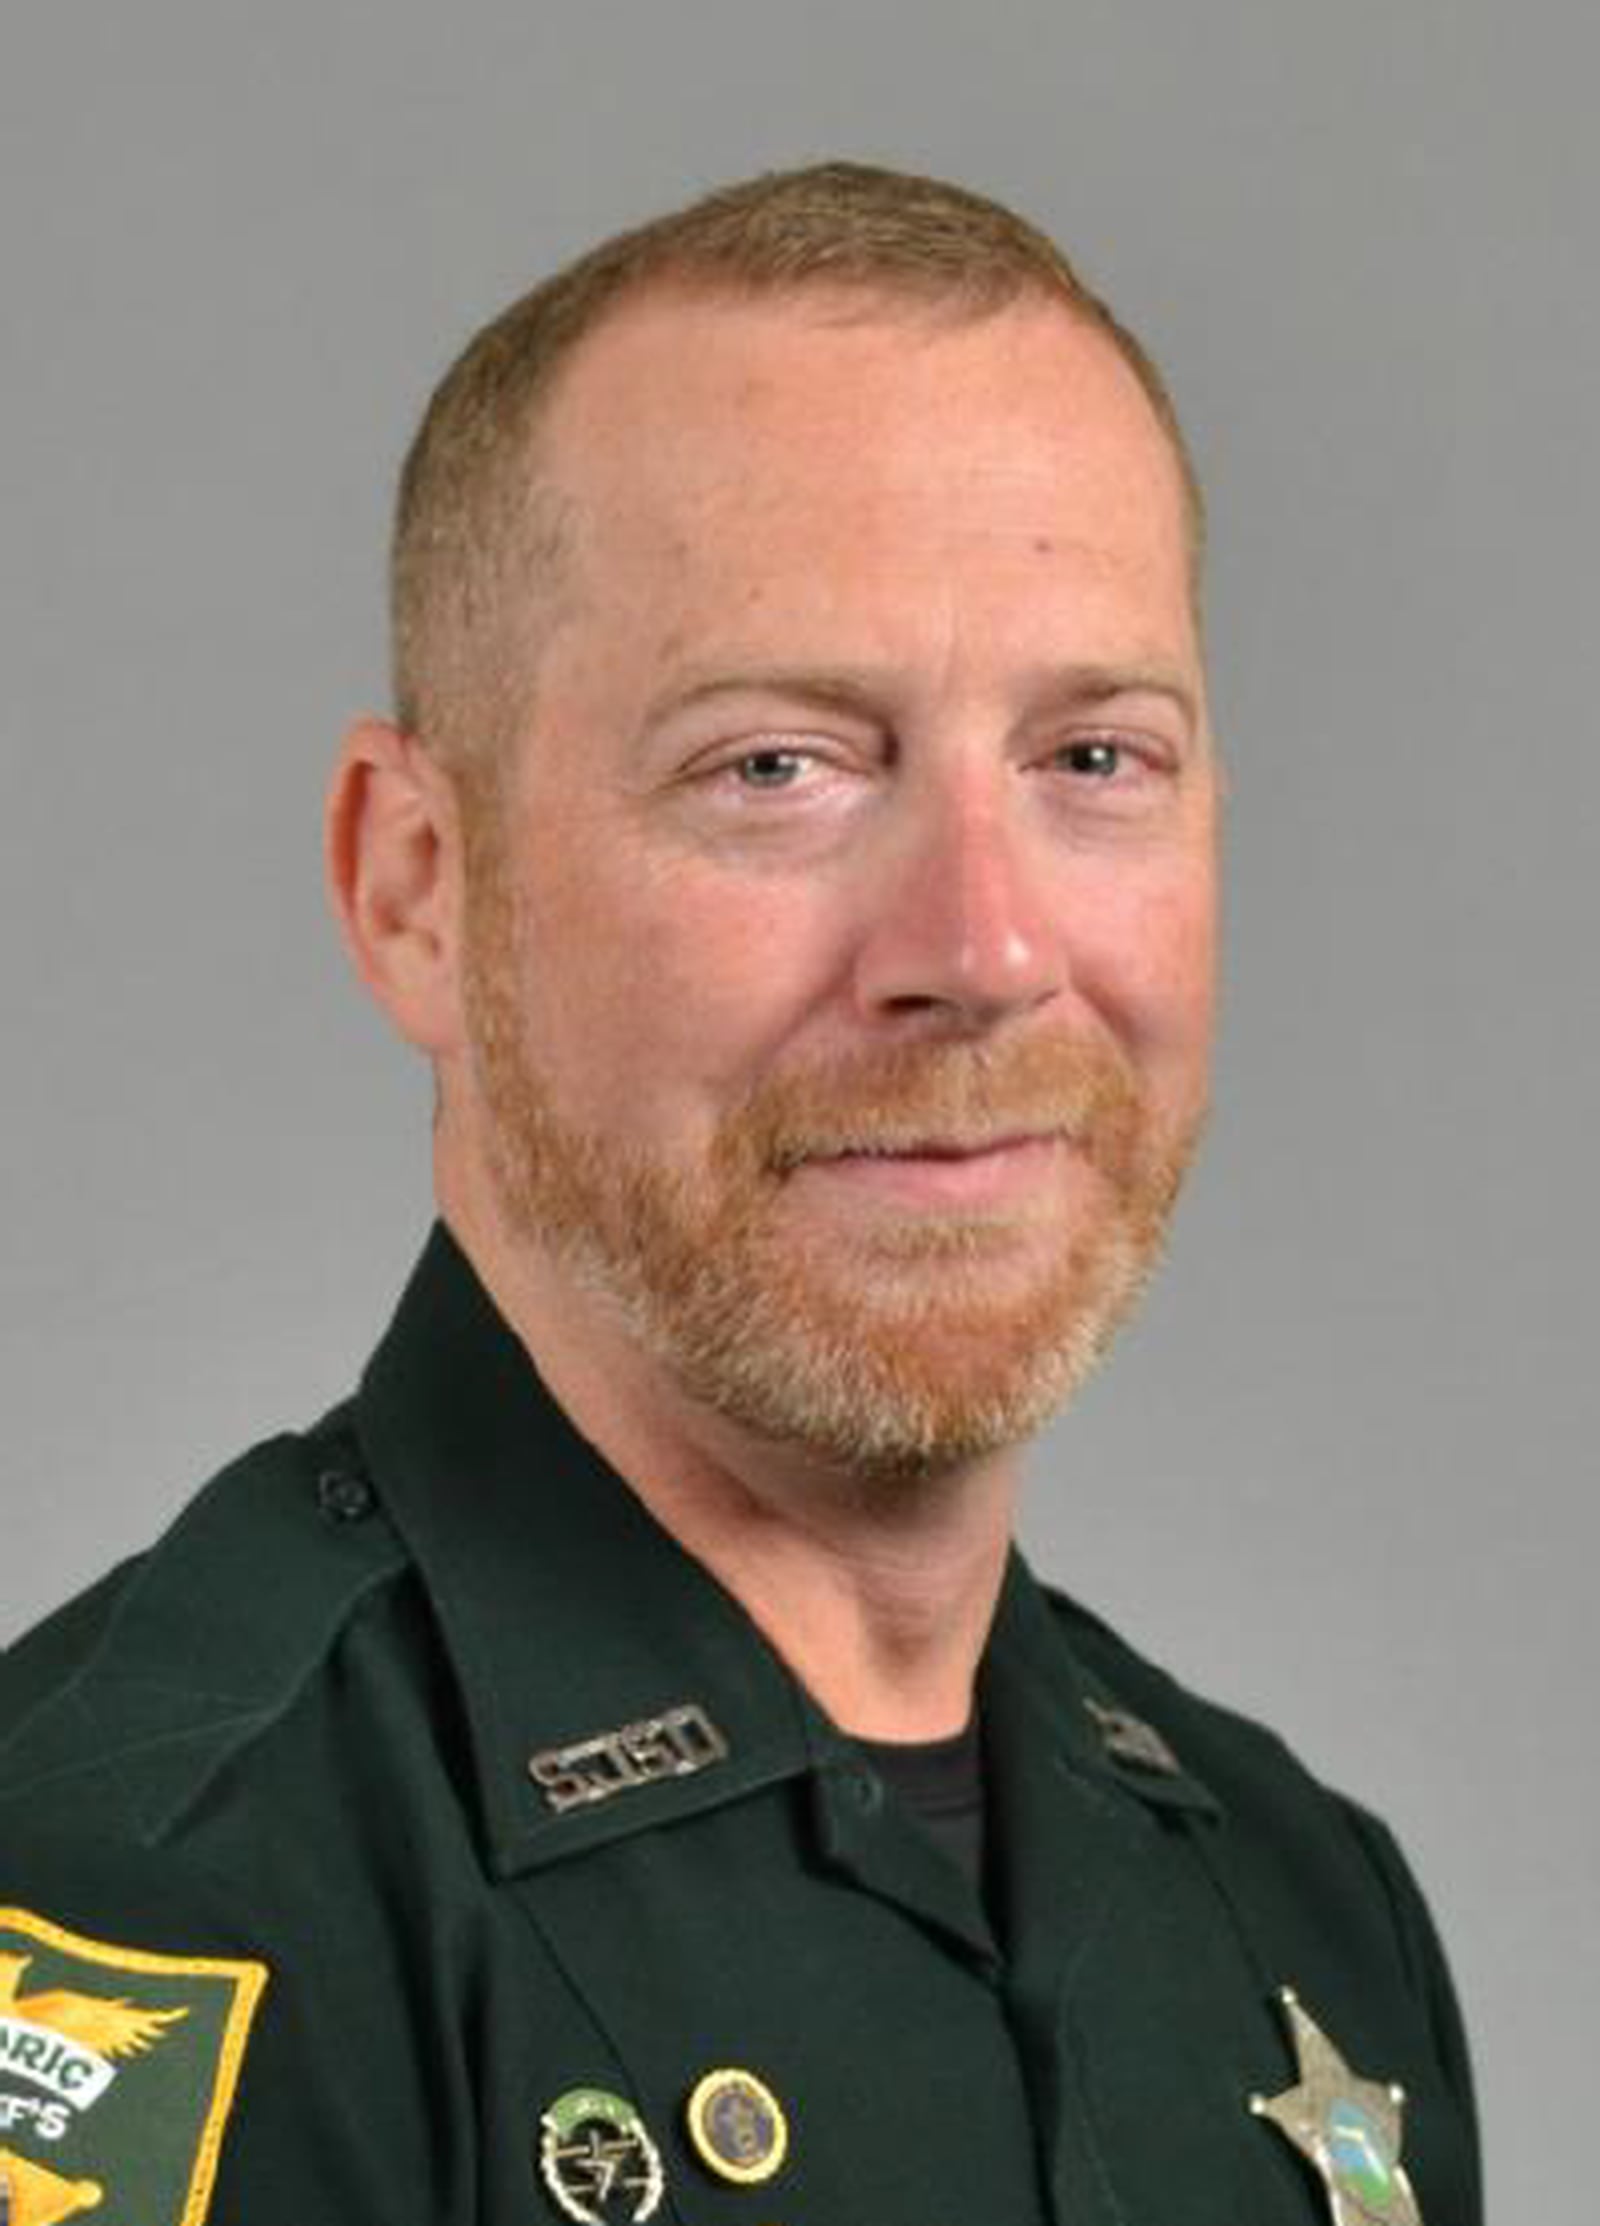 St. Johns County Sheriff’s Office announces unexpected passing of